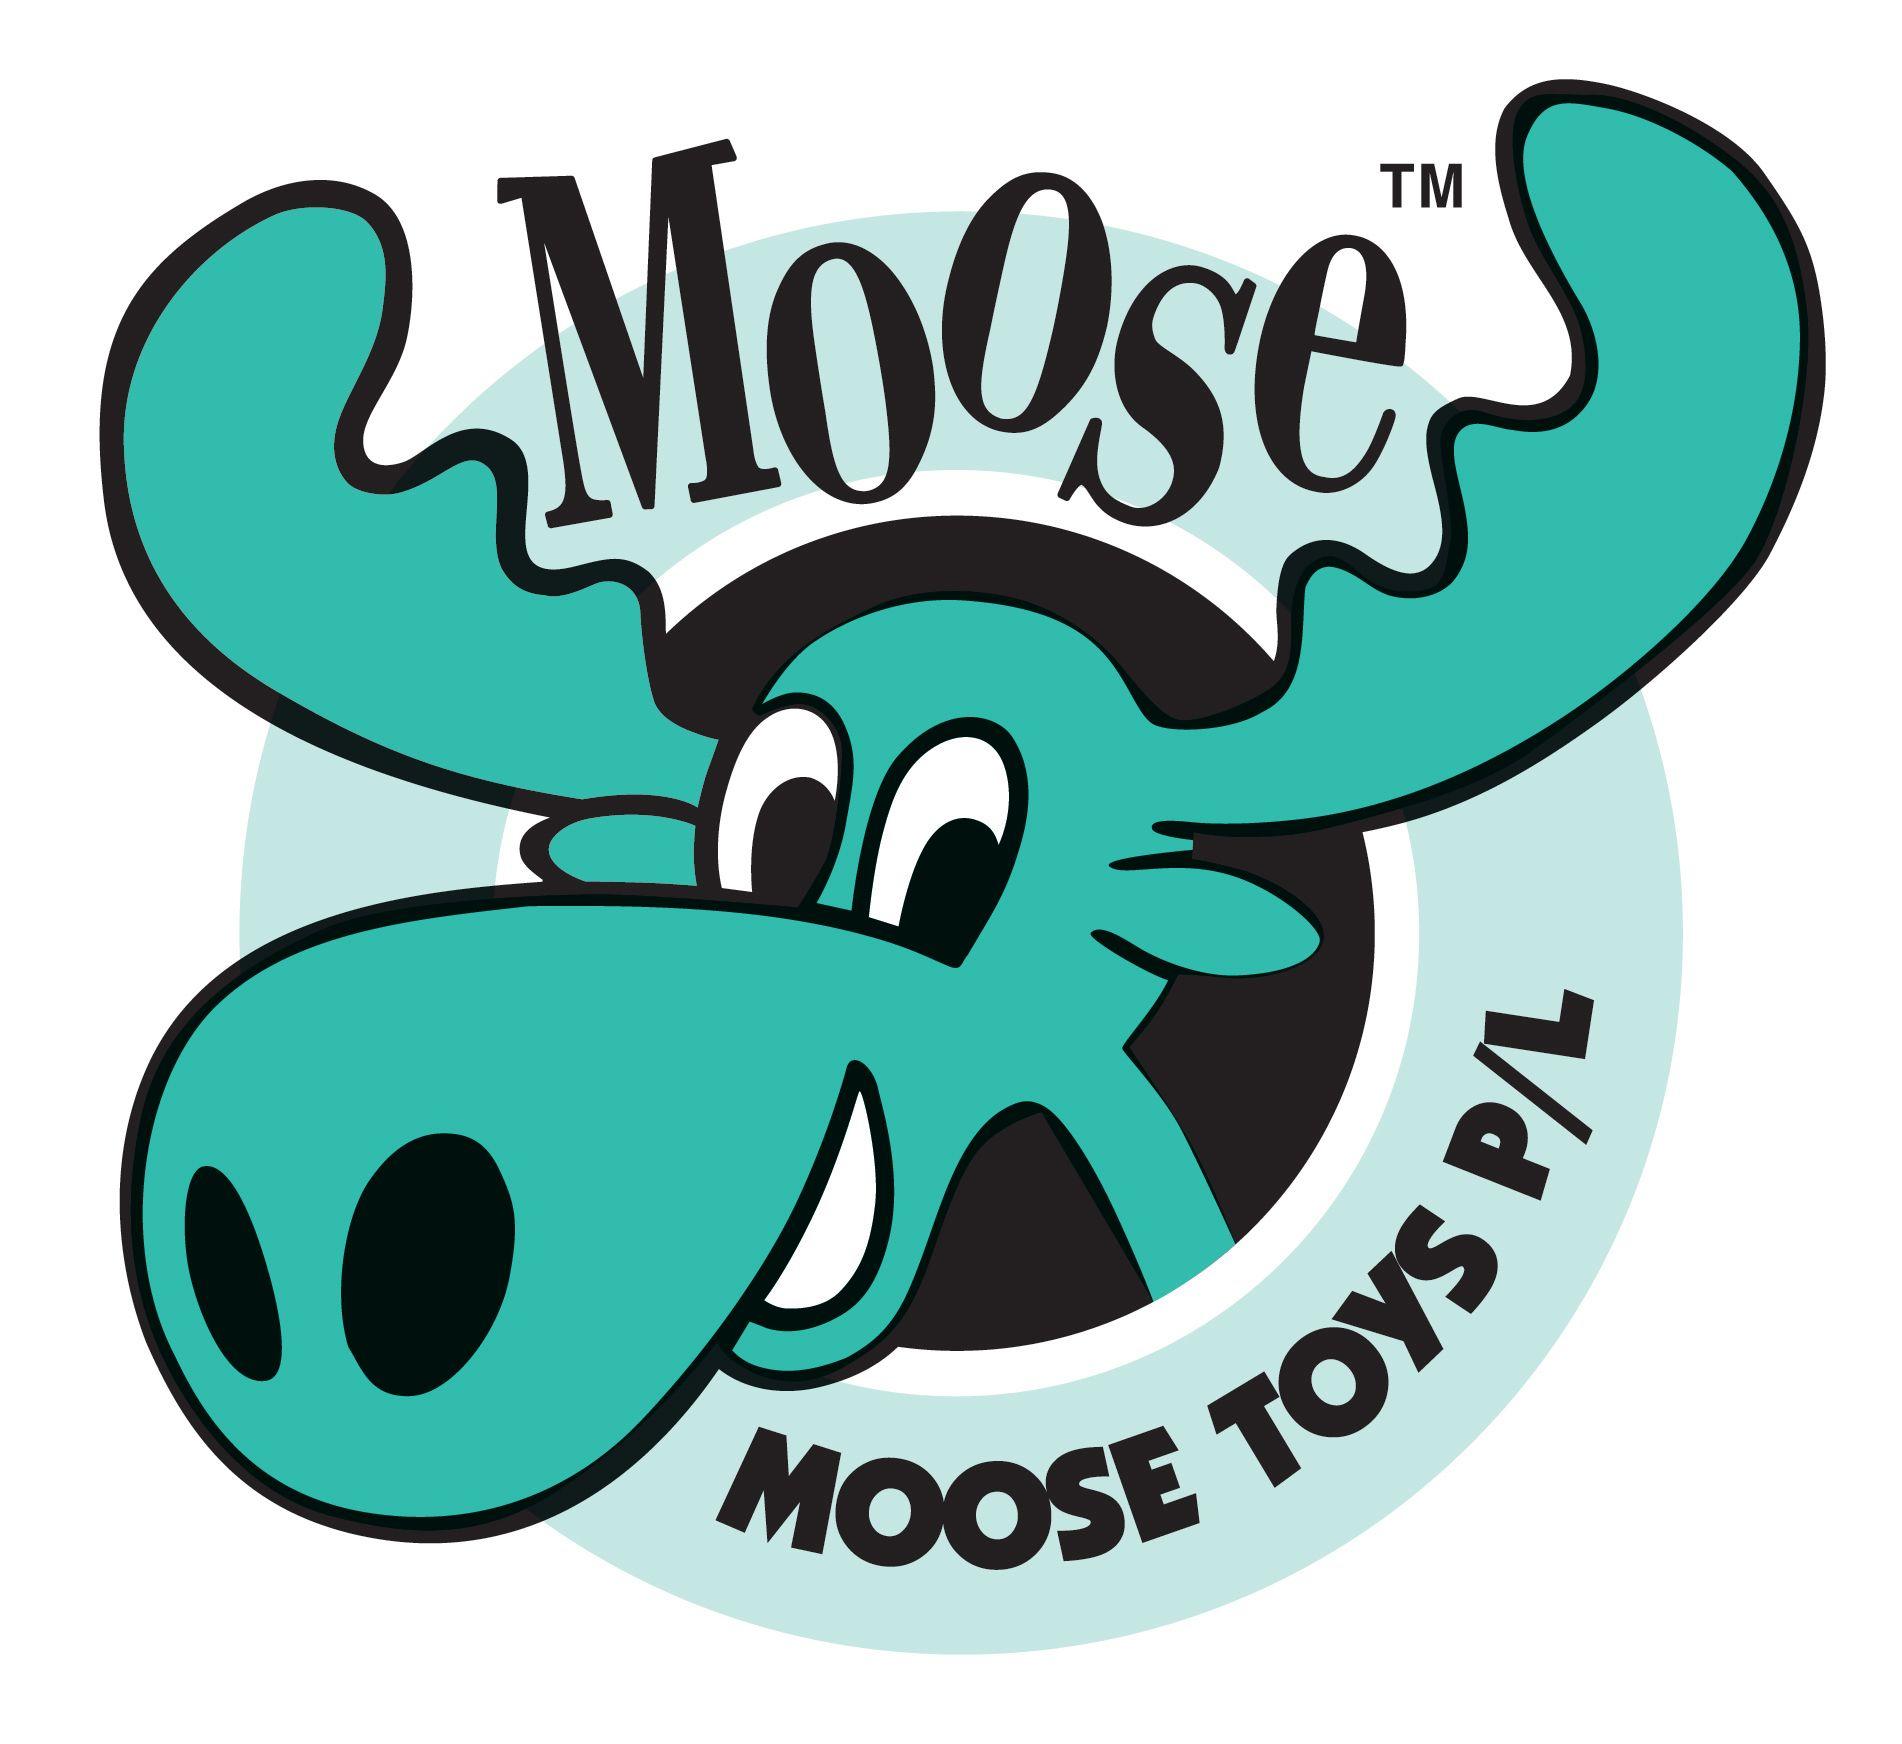 Who Has a Moose Logo - Moose Toys(TM) Introduces The Ugglys(TM), Rude and Repulsive ...